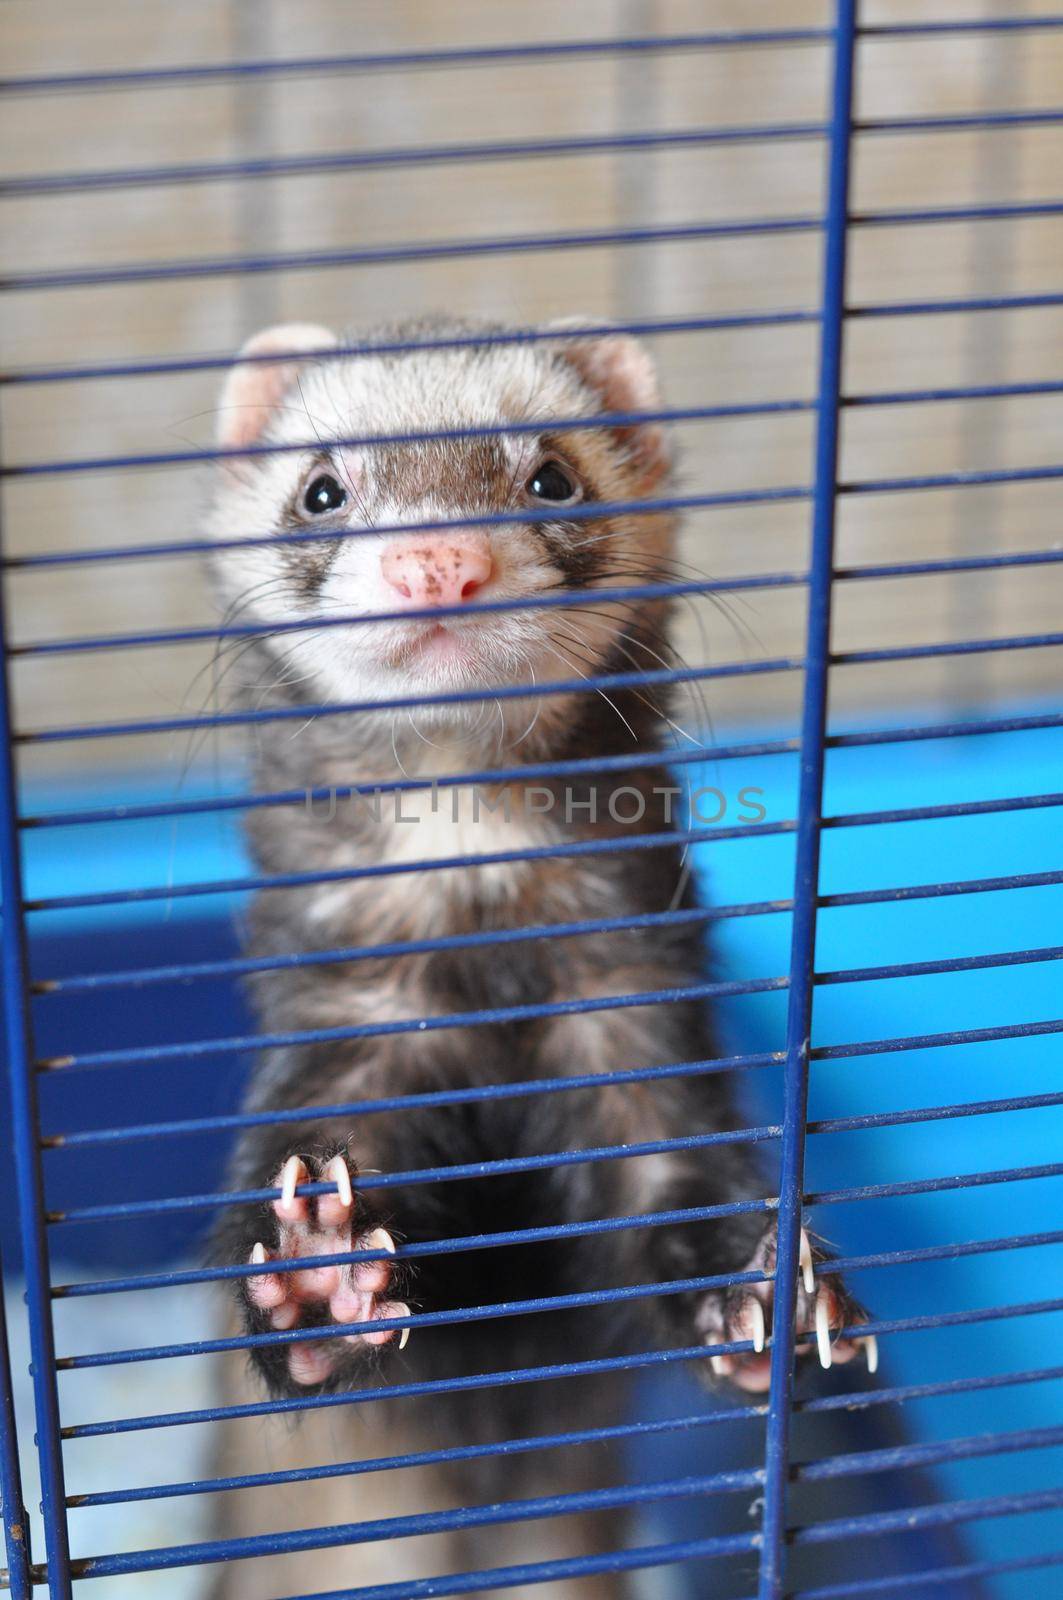 Black ferret with the white head in behind the cage bars.